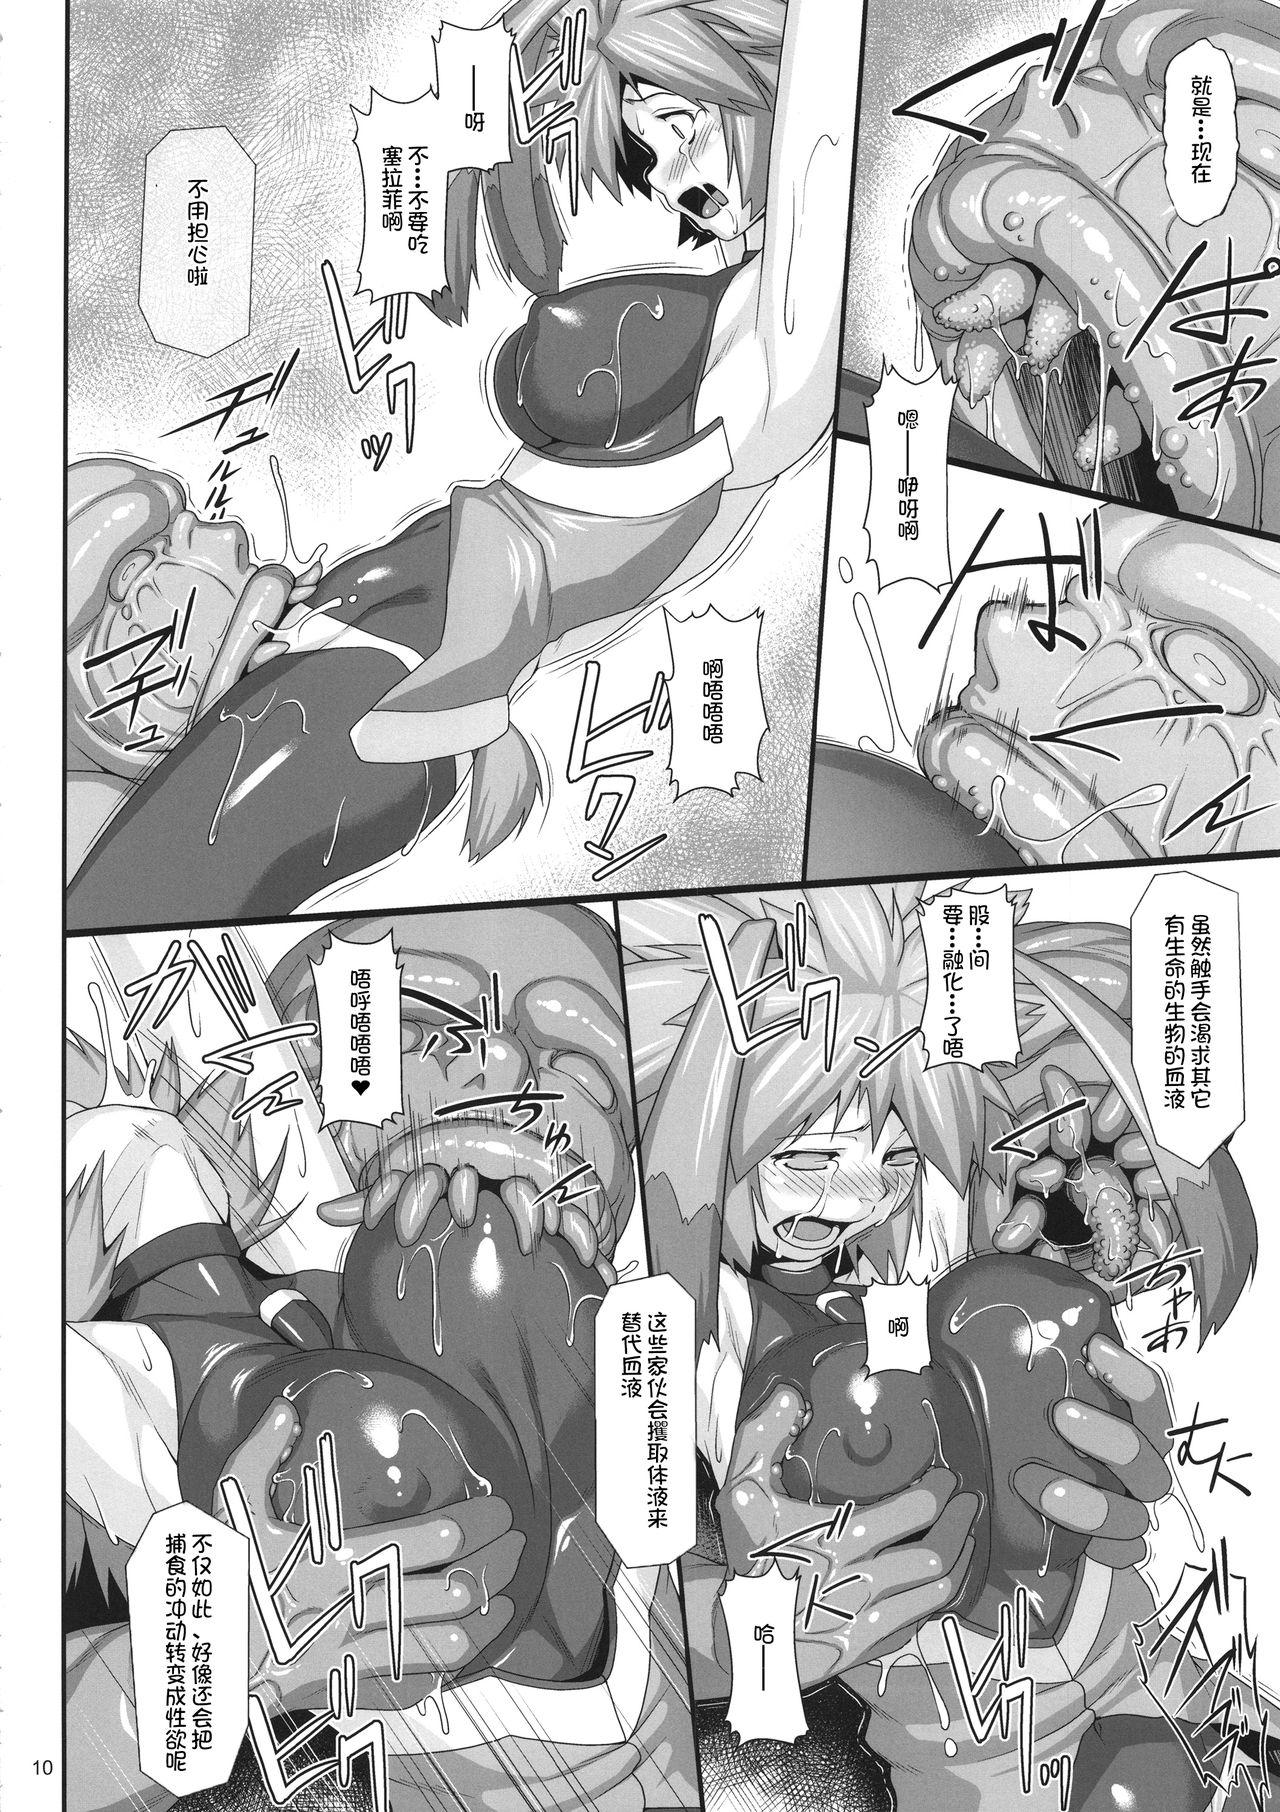 Nudity Seraphic Gate 4 - Xenogears Big Ass - Page 10